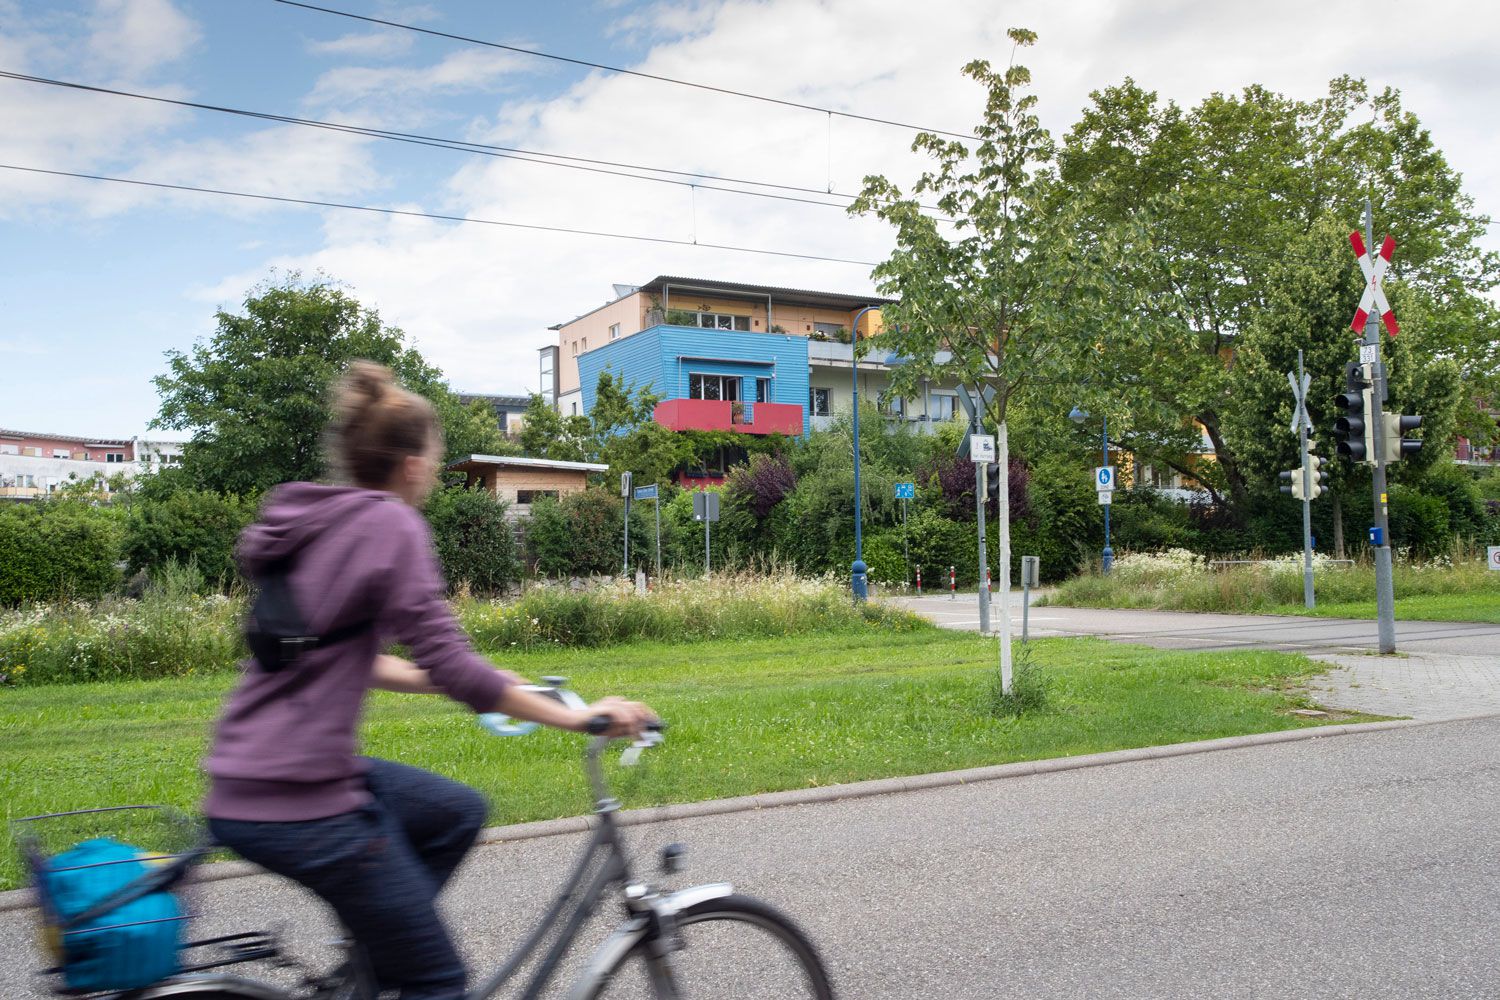 This German neighborhood has everything. Except cars. - Experience Magazine